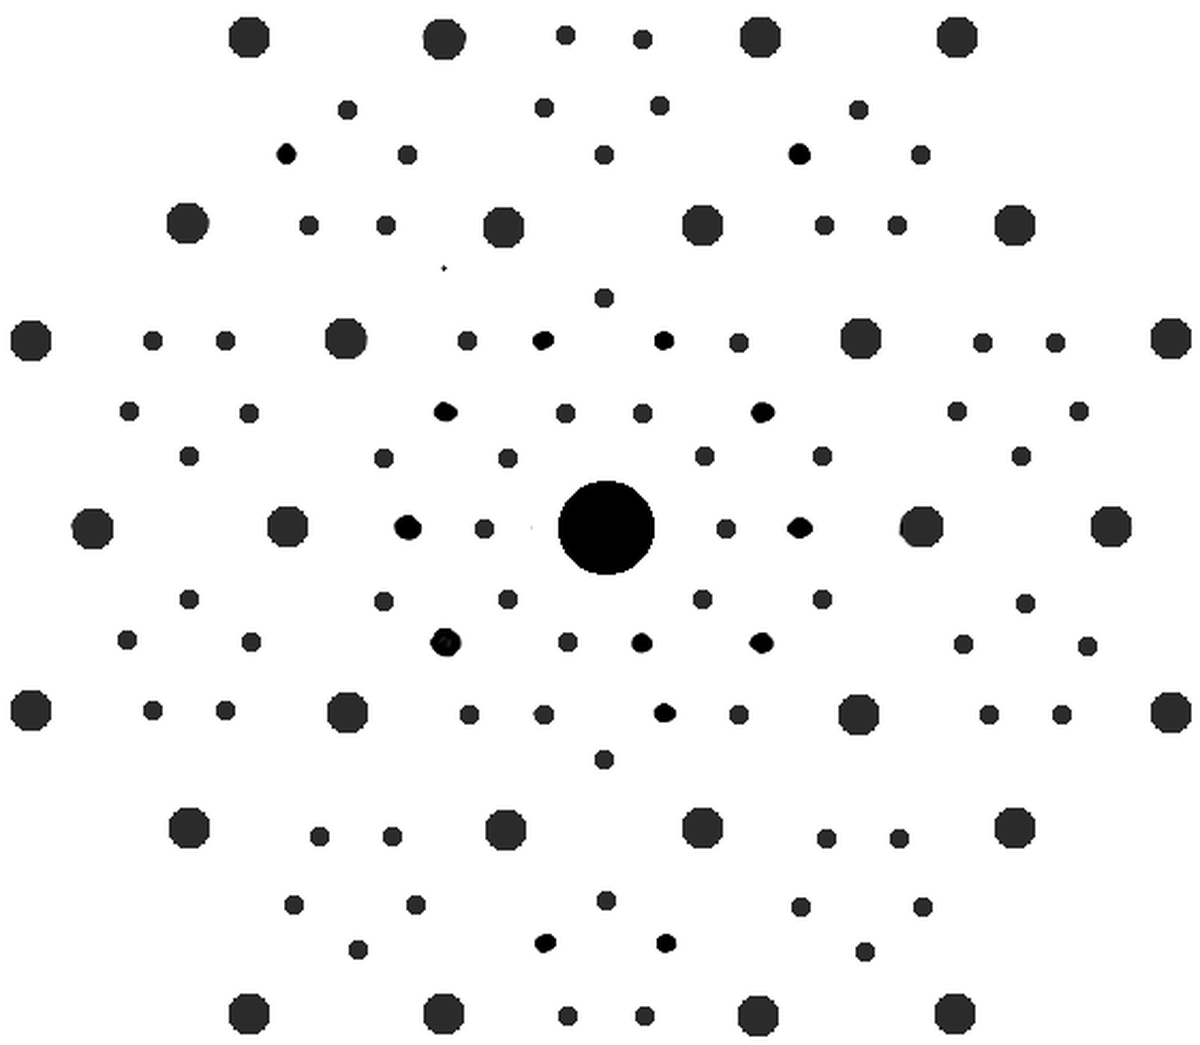 An X-ray diffraction pattern showing the arrangement of atoms in an icosahedrite crystal in the Khatyrka meteorite.